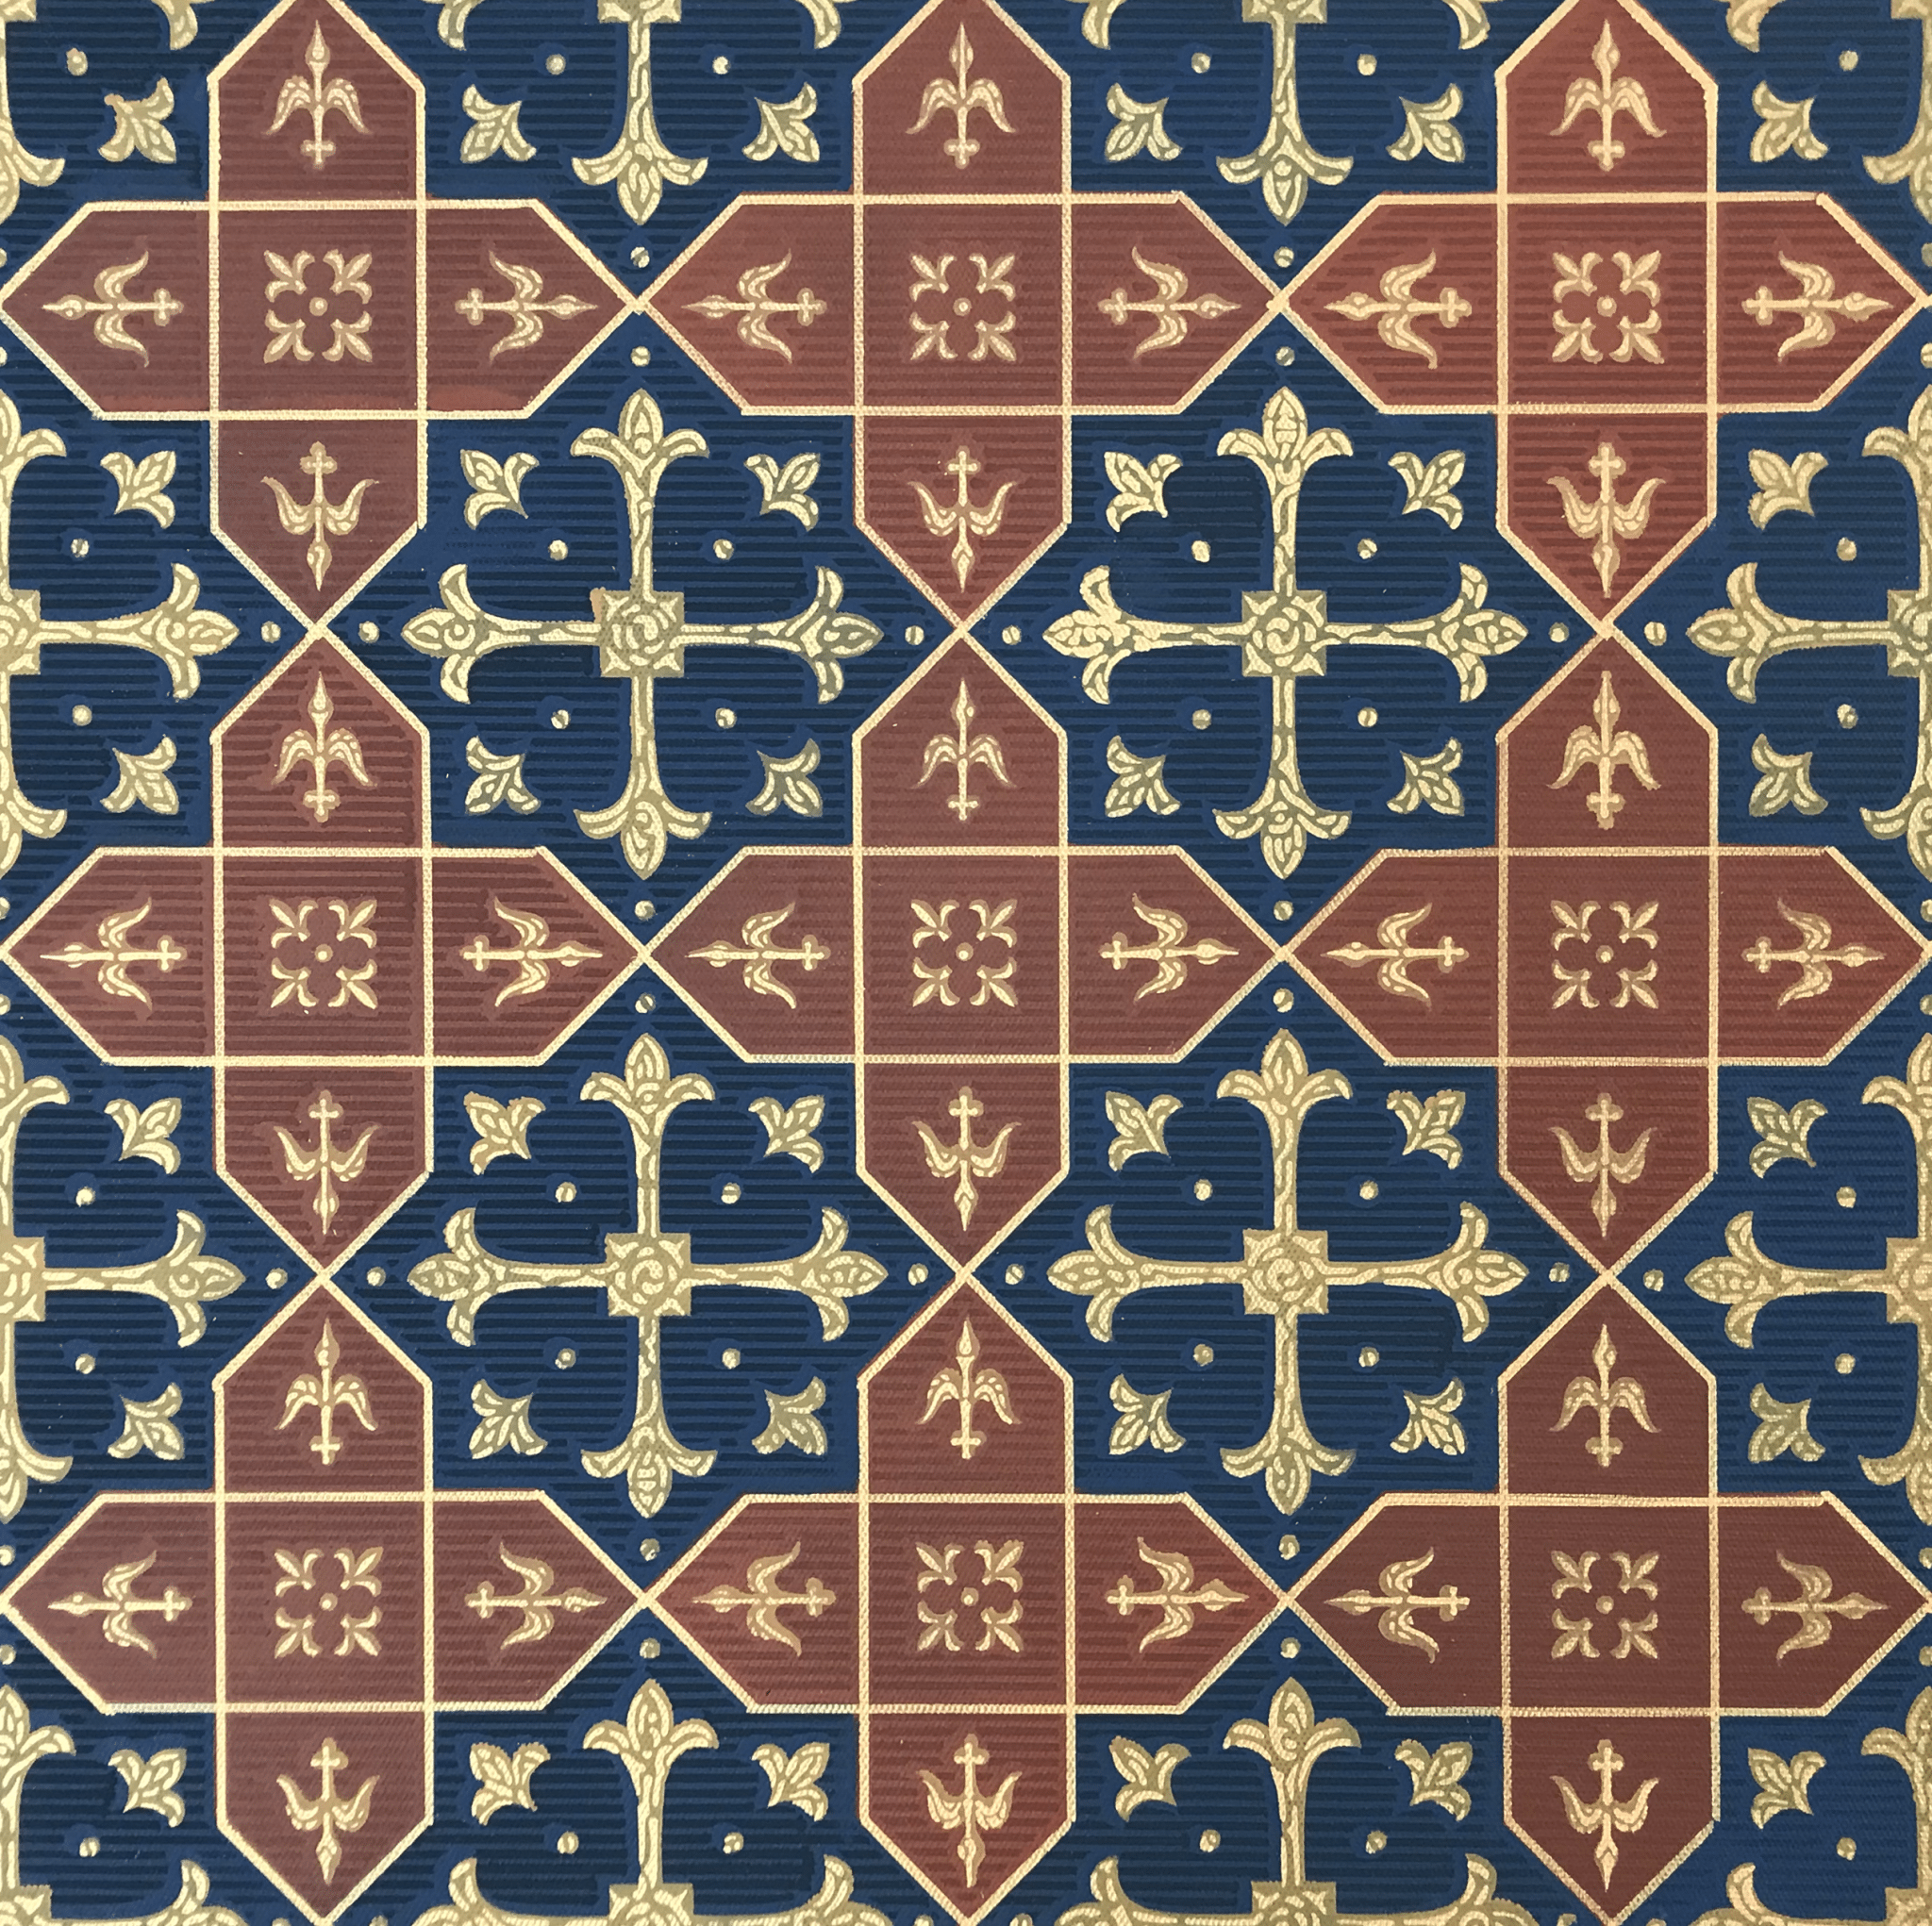 A close up of the tile-like Hay House pattern used for Hay House Floorcloth #4.